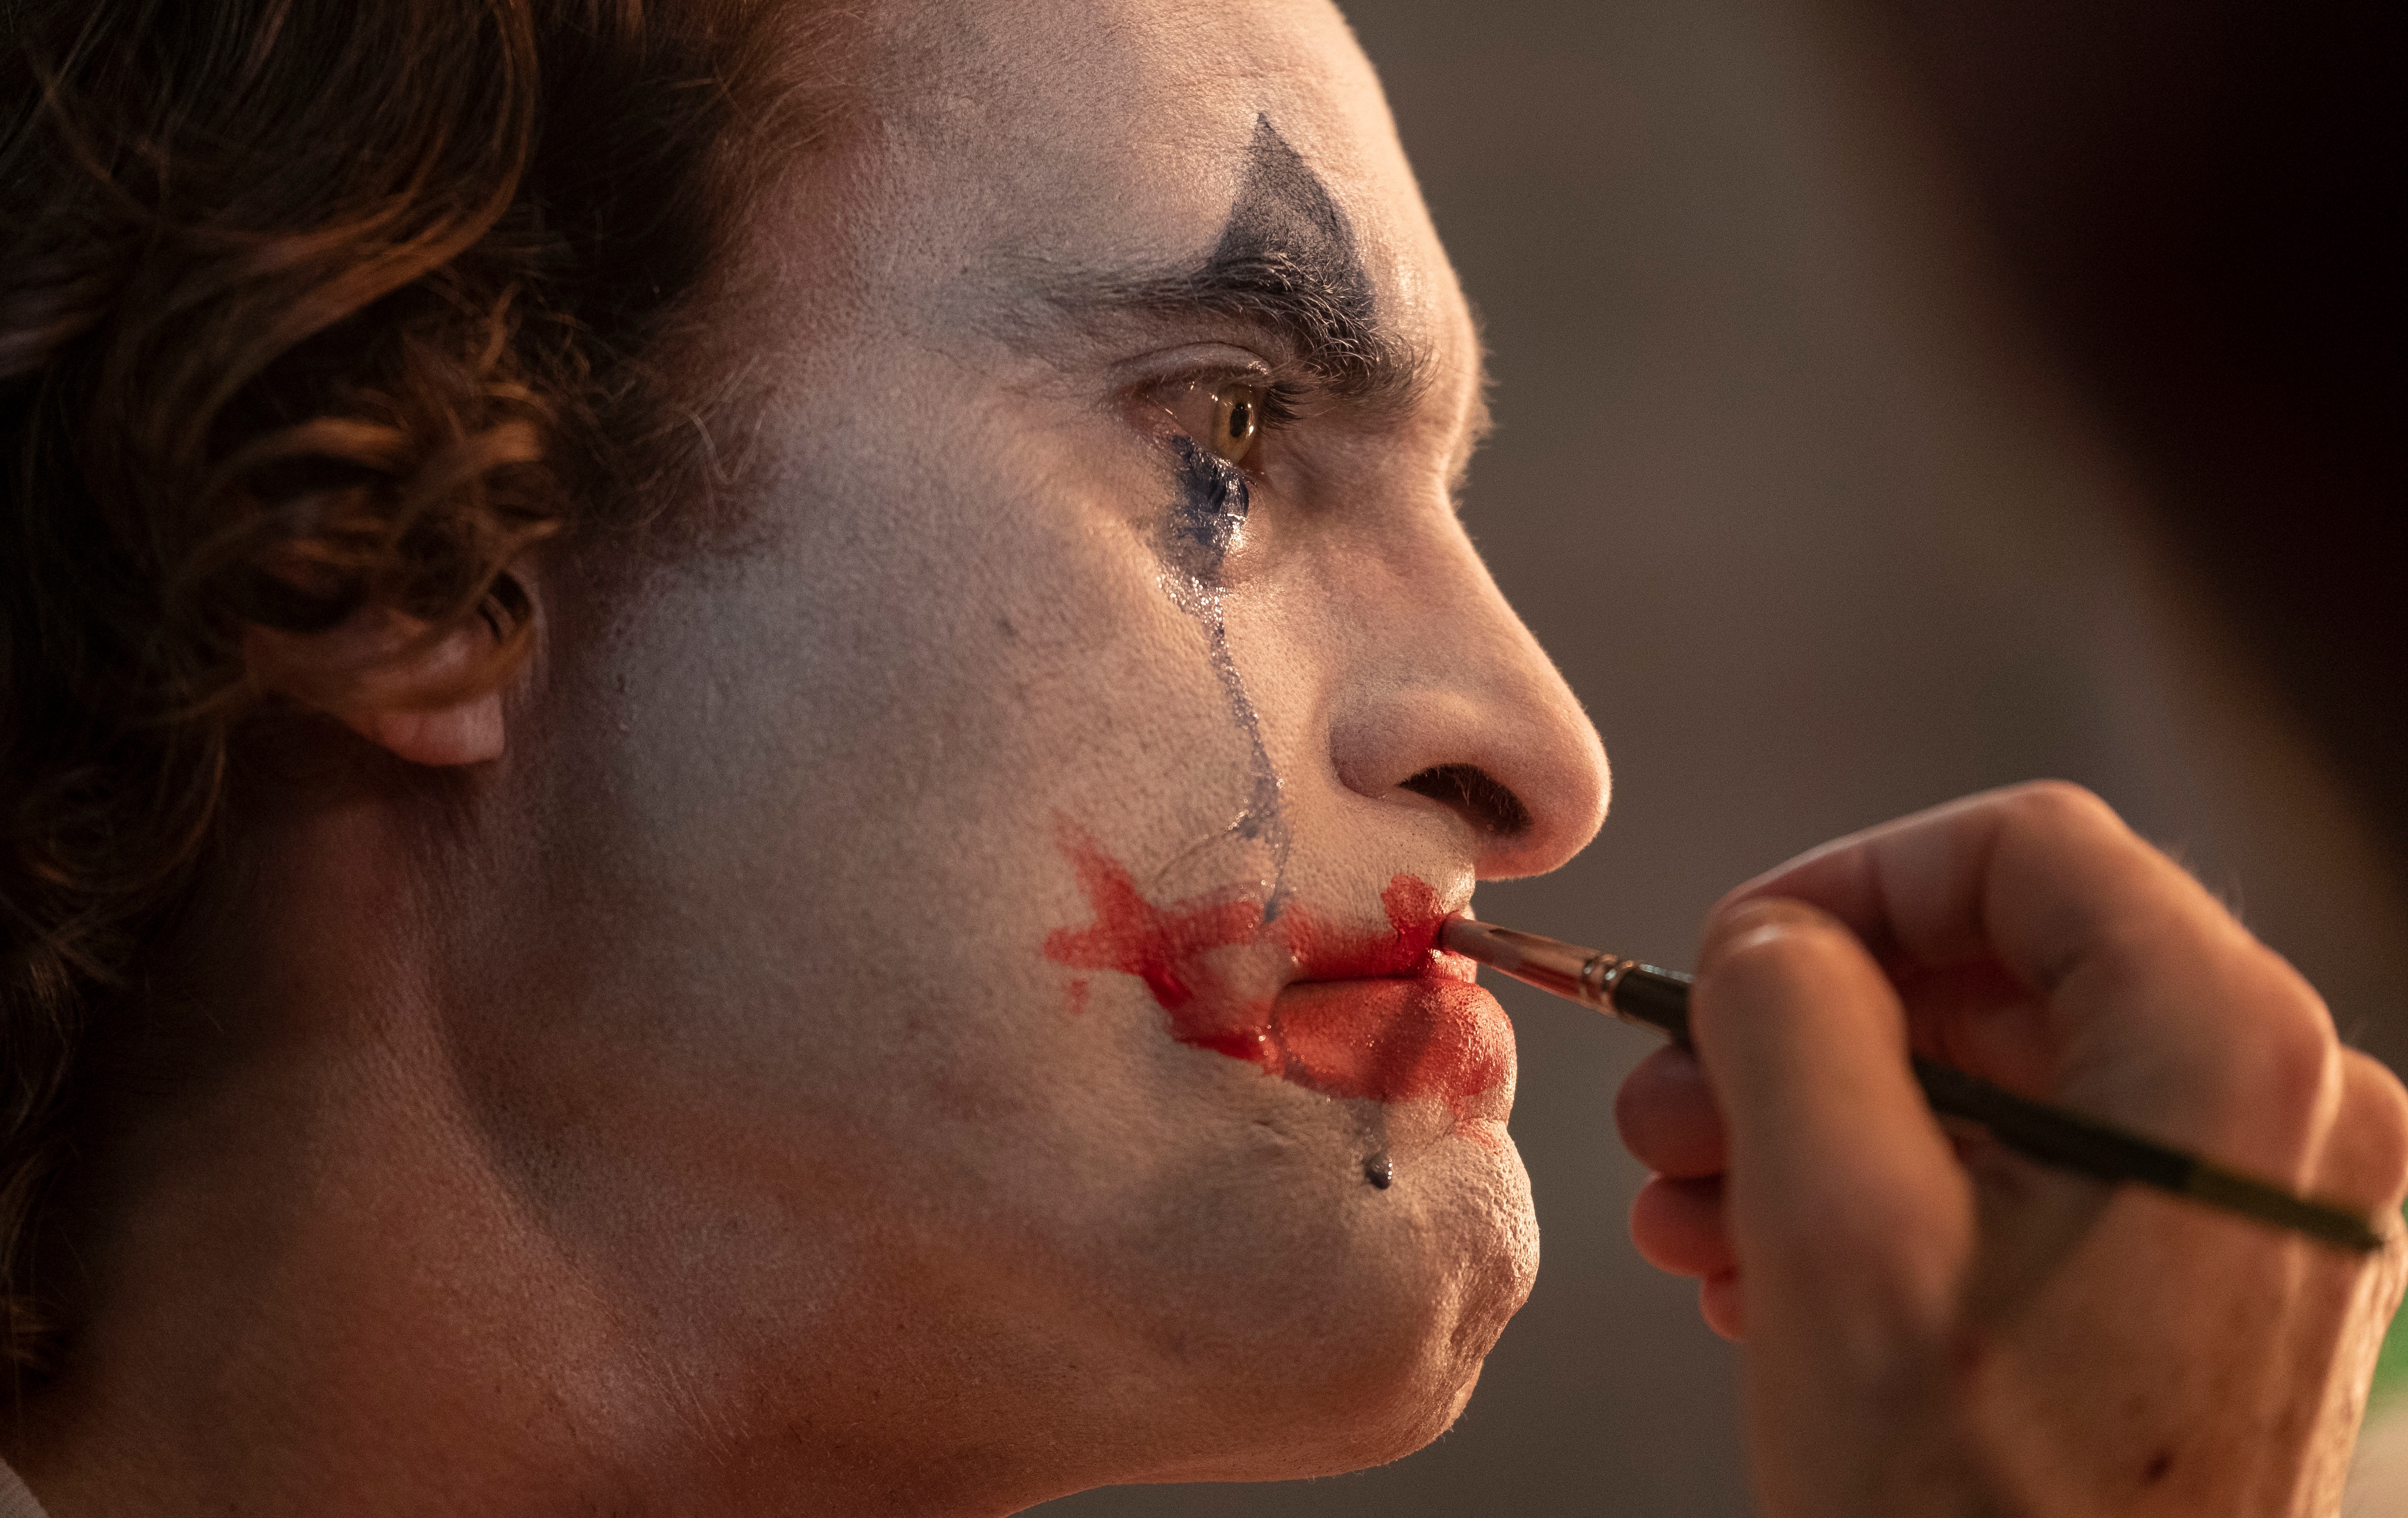 How Joker got his iconic hair and makeup | SYFY WIRE